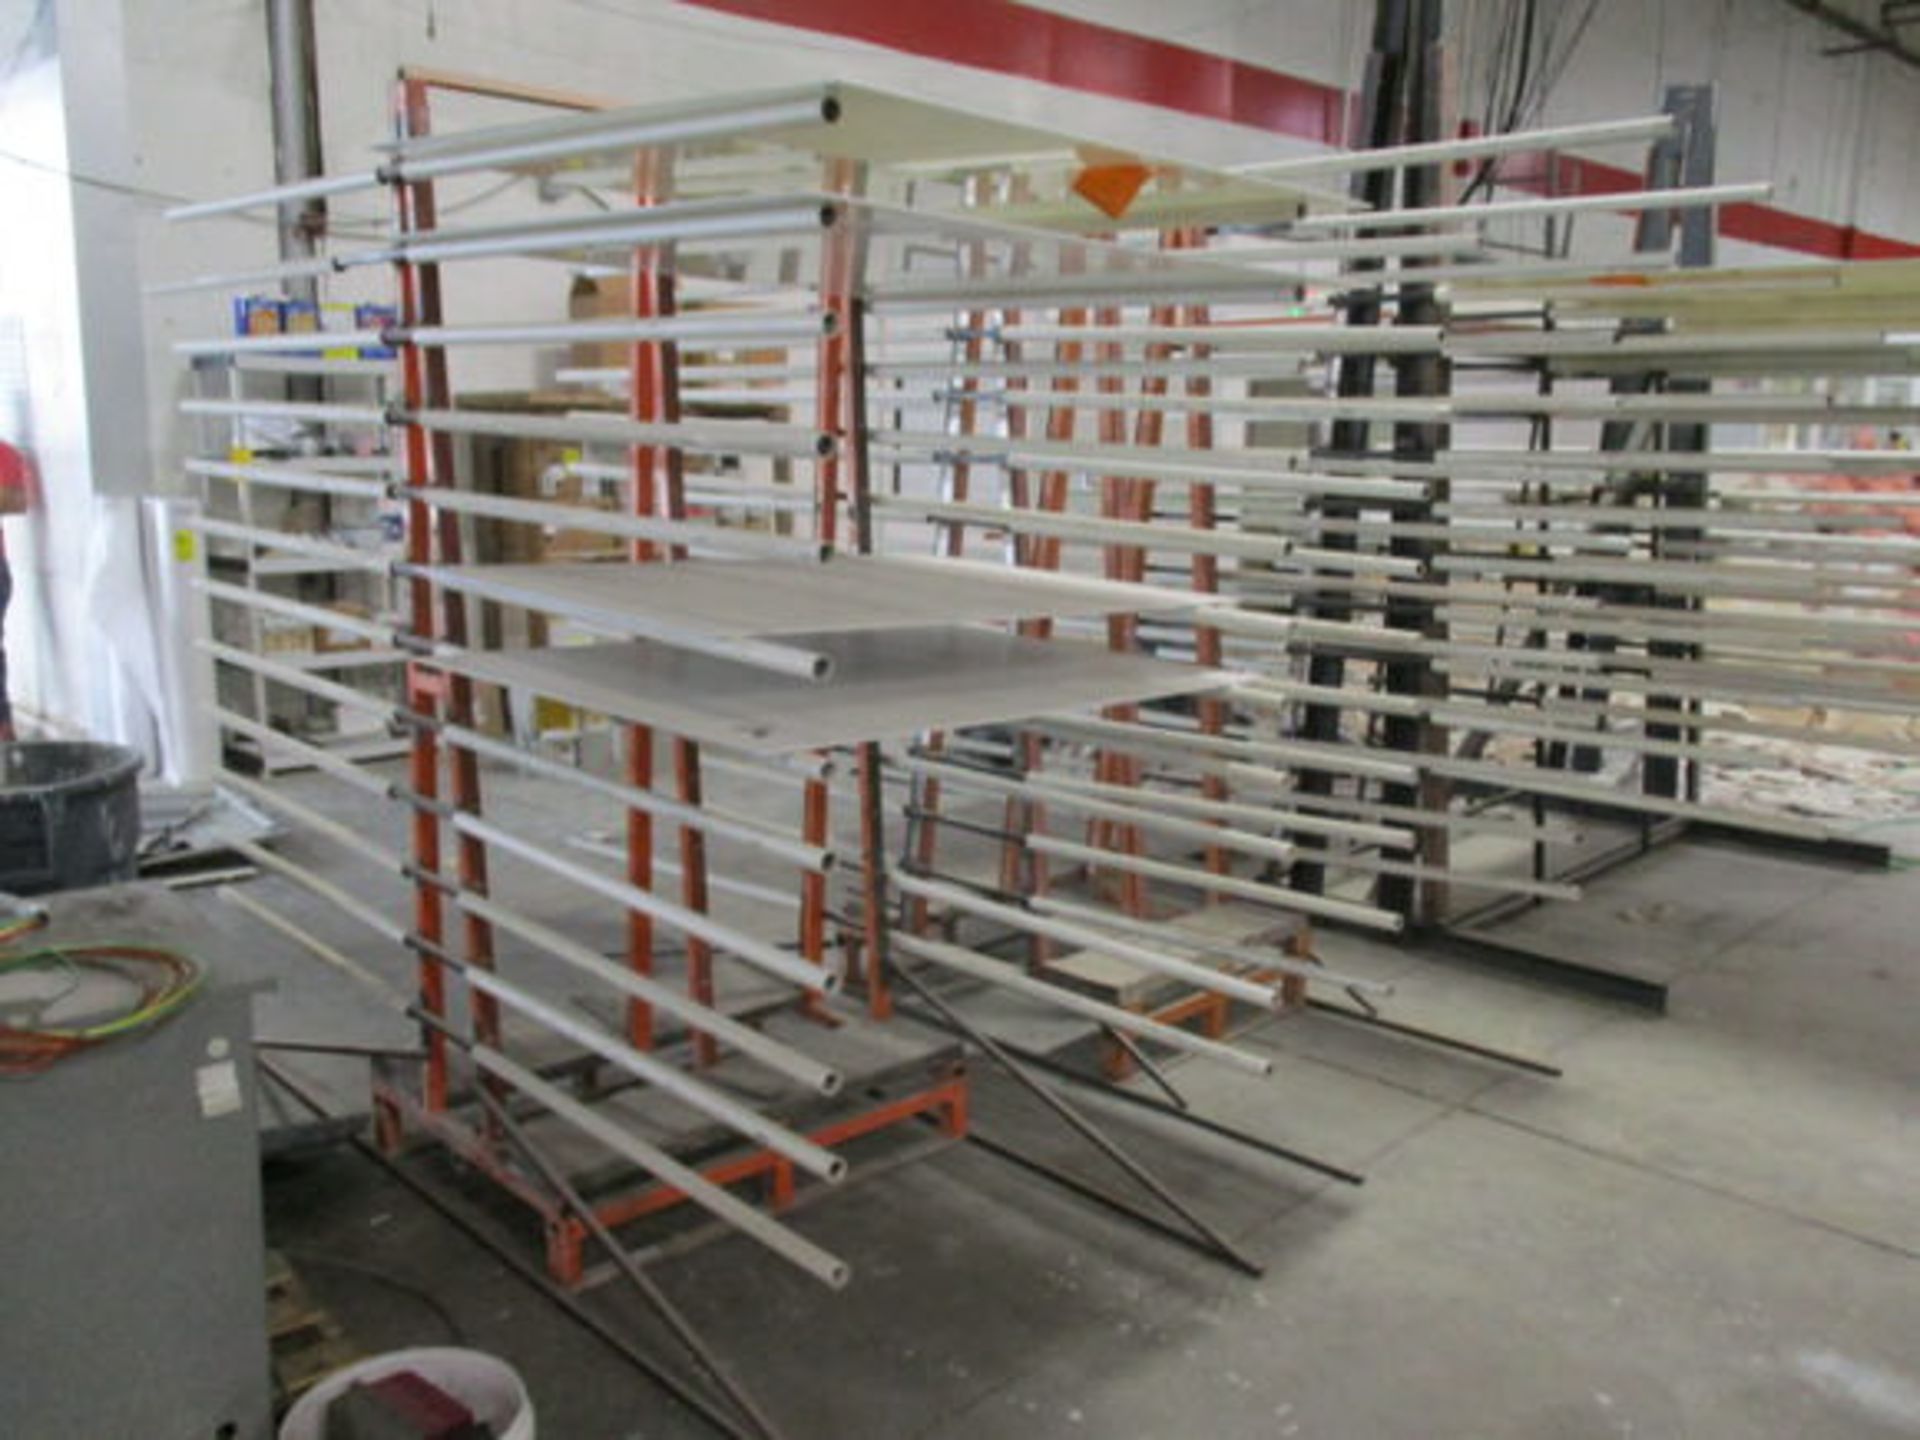 (2) DOUBLE SIDED METAL GLASS RACKS, APPROX 3' X 4' X 7' W/ HORIZONTAL HOLDERS WELDED ON ONE SIDE - Image 2 of 2